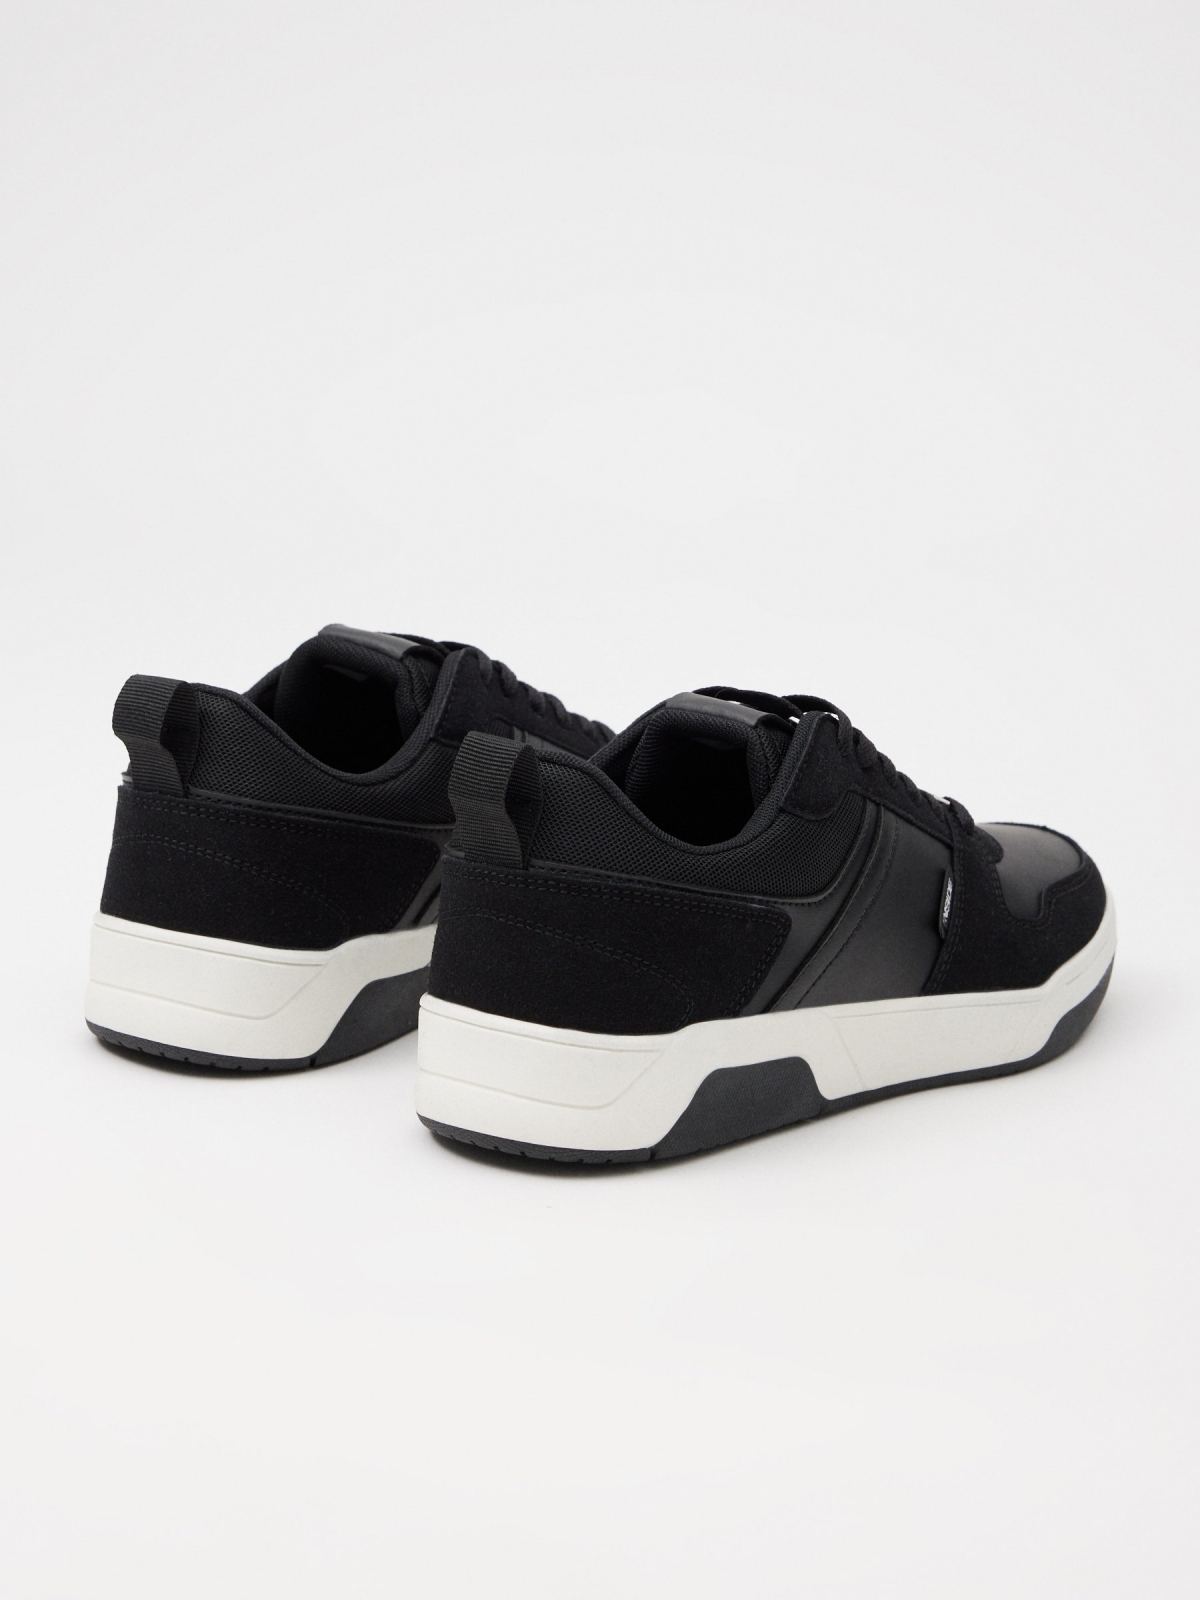 Skater and patent leather sneaker black 45º back view